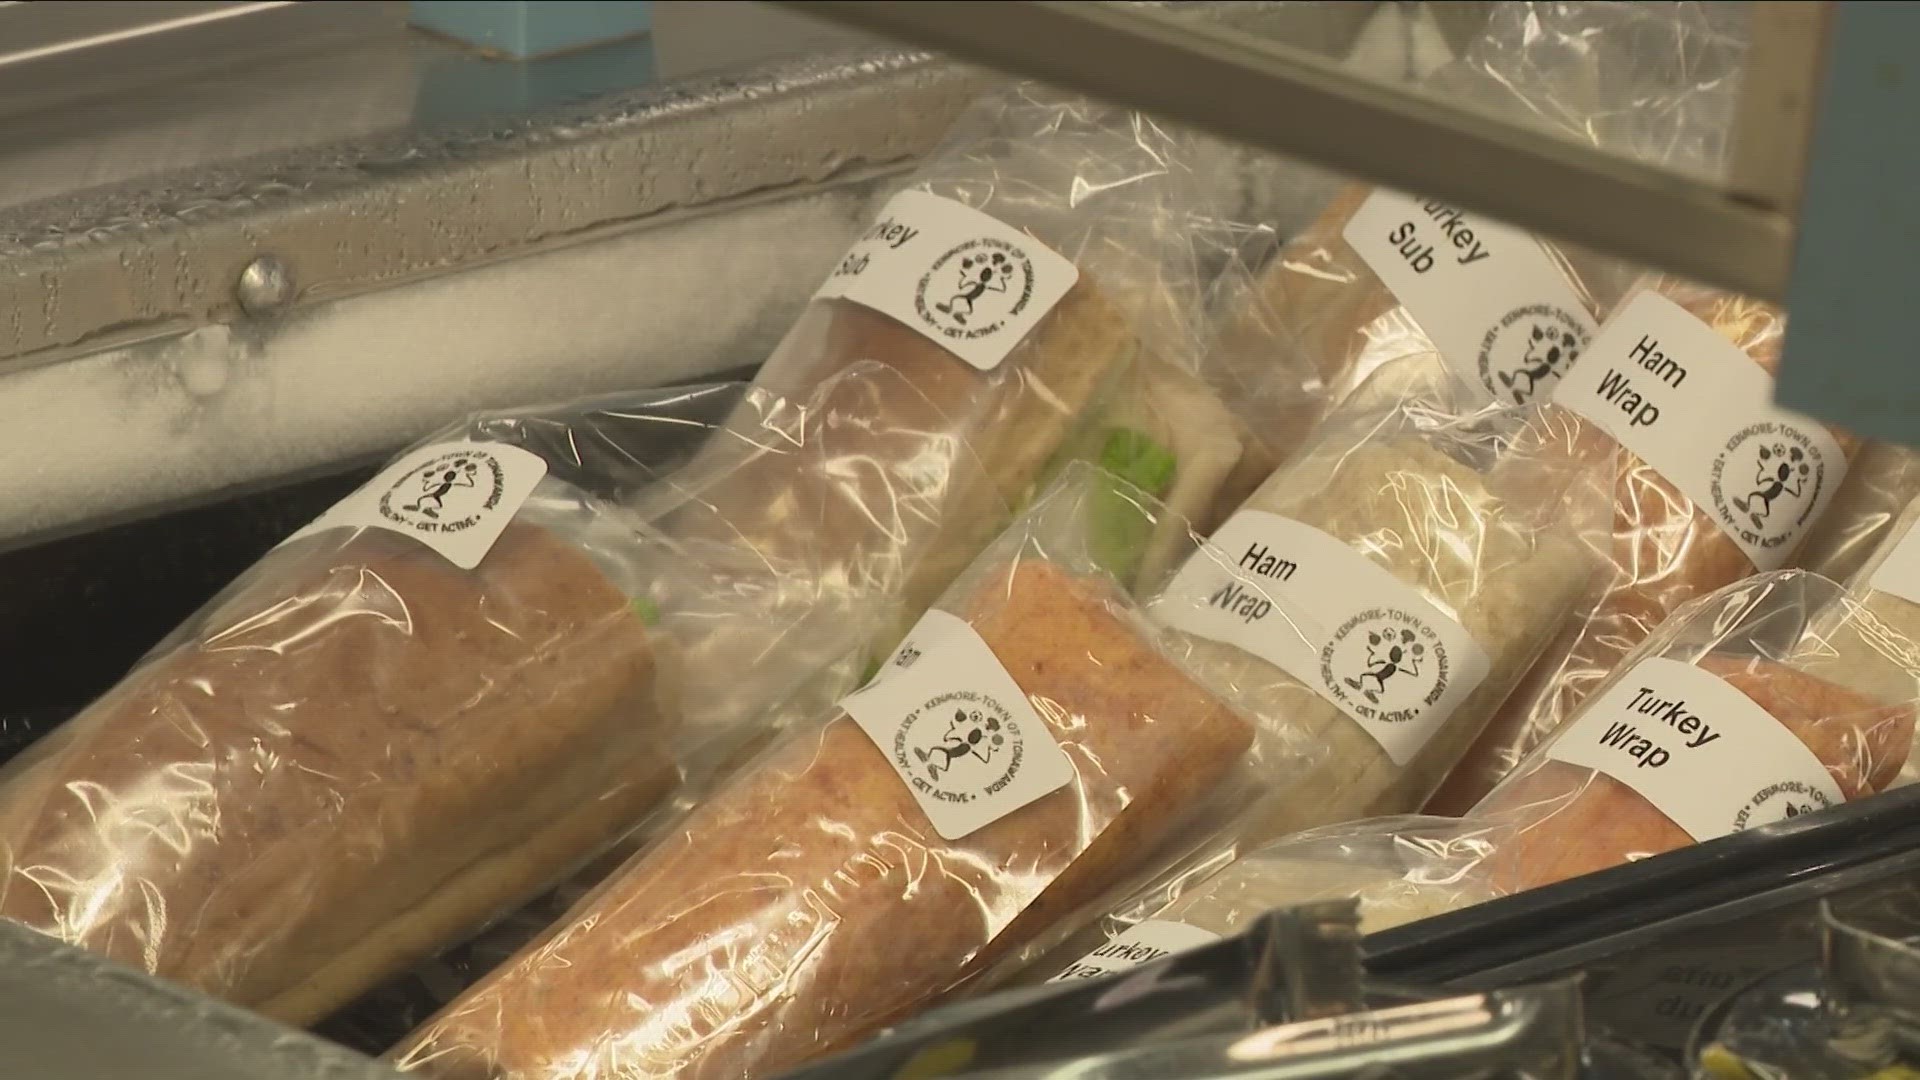 the ken-ton school district is receiving nearly 300-thousand meals for the upcoming school year it'll provide free lunch and breakfast for students.